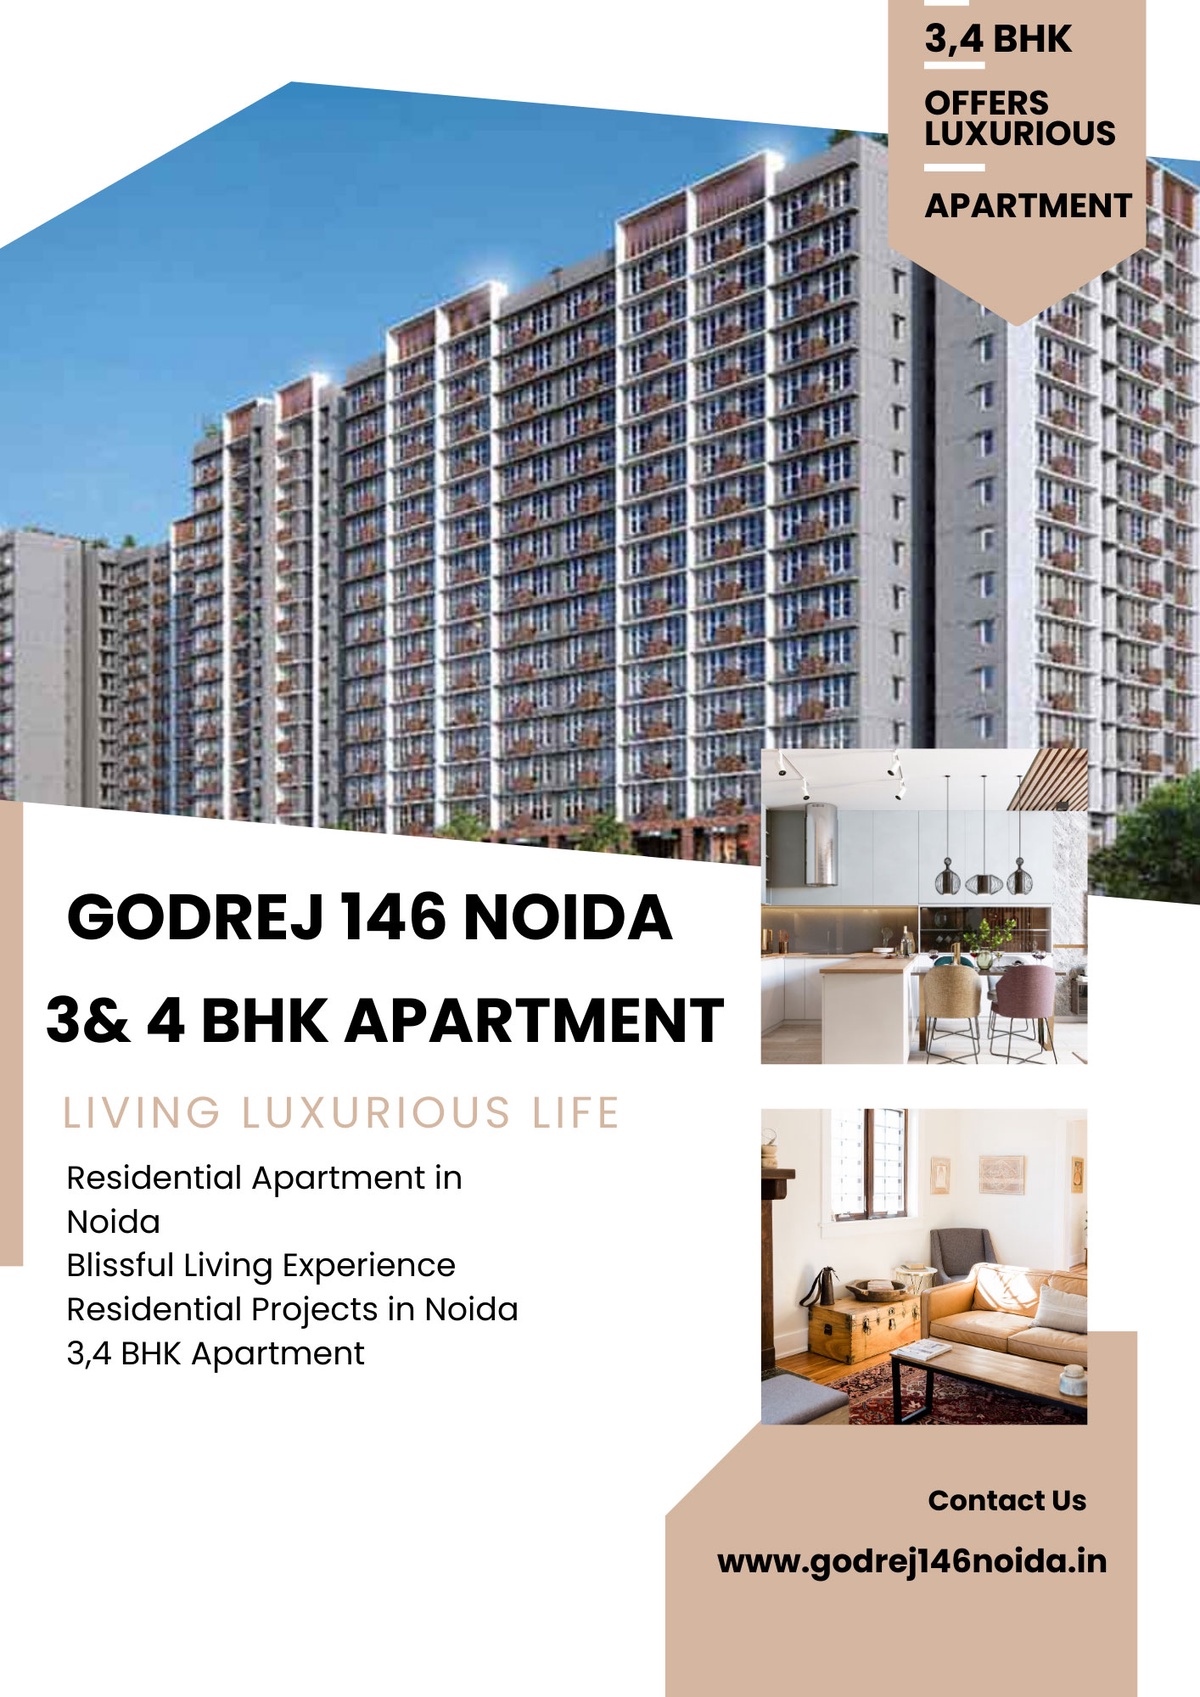 An Overview Of Godrej Sector 146 Noida - All You Need